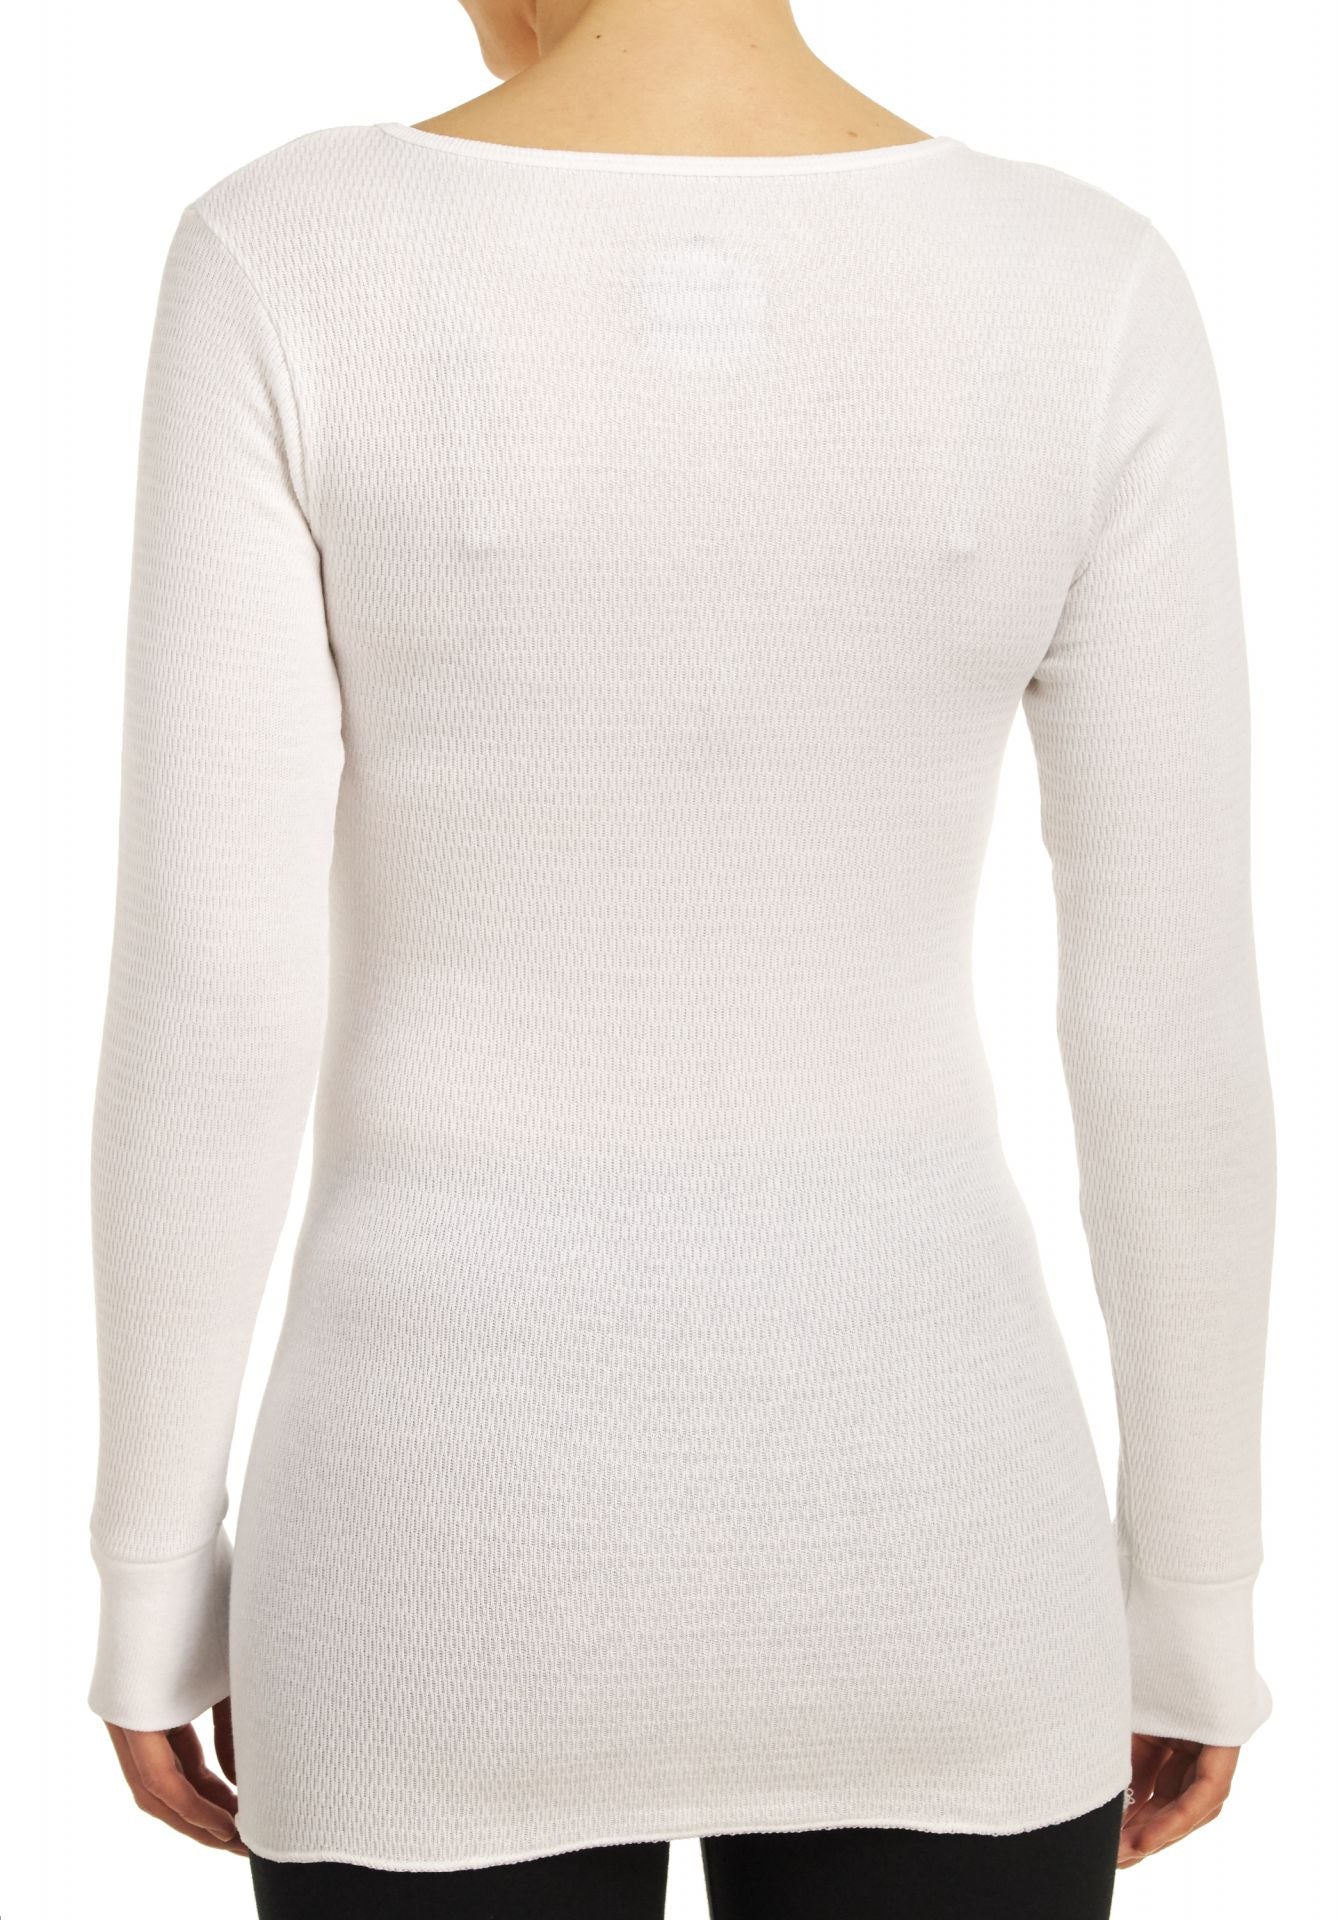 ICETEX Dual Face Fleeced Knit Thermal Long Sleeve Shirt